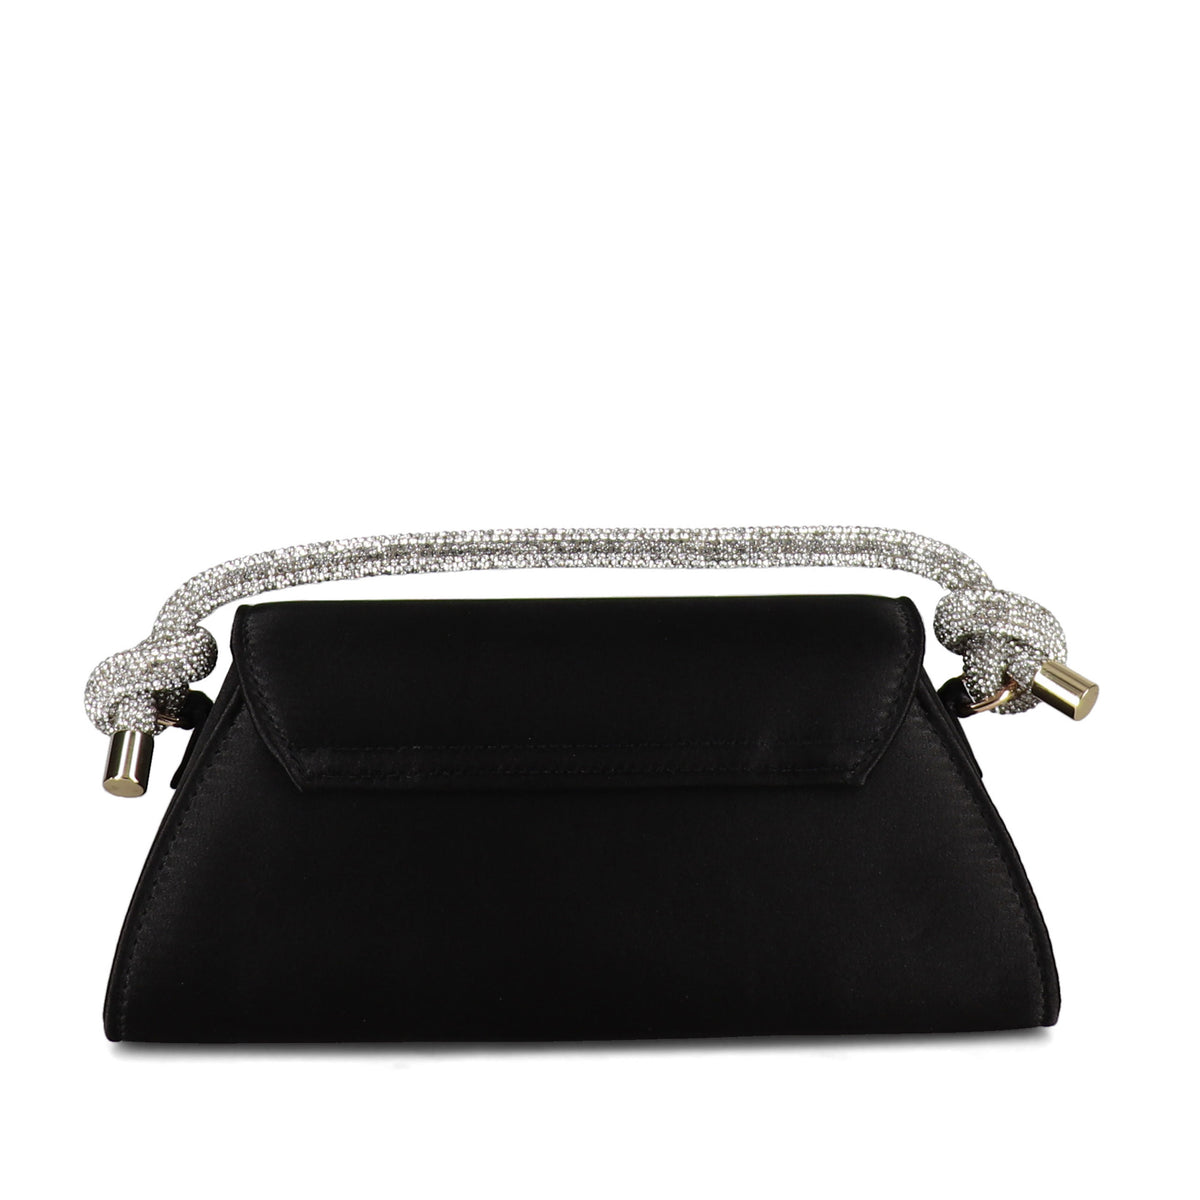 Jewel Satin Flap Clutch With Pave Crystal Handle